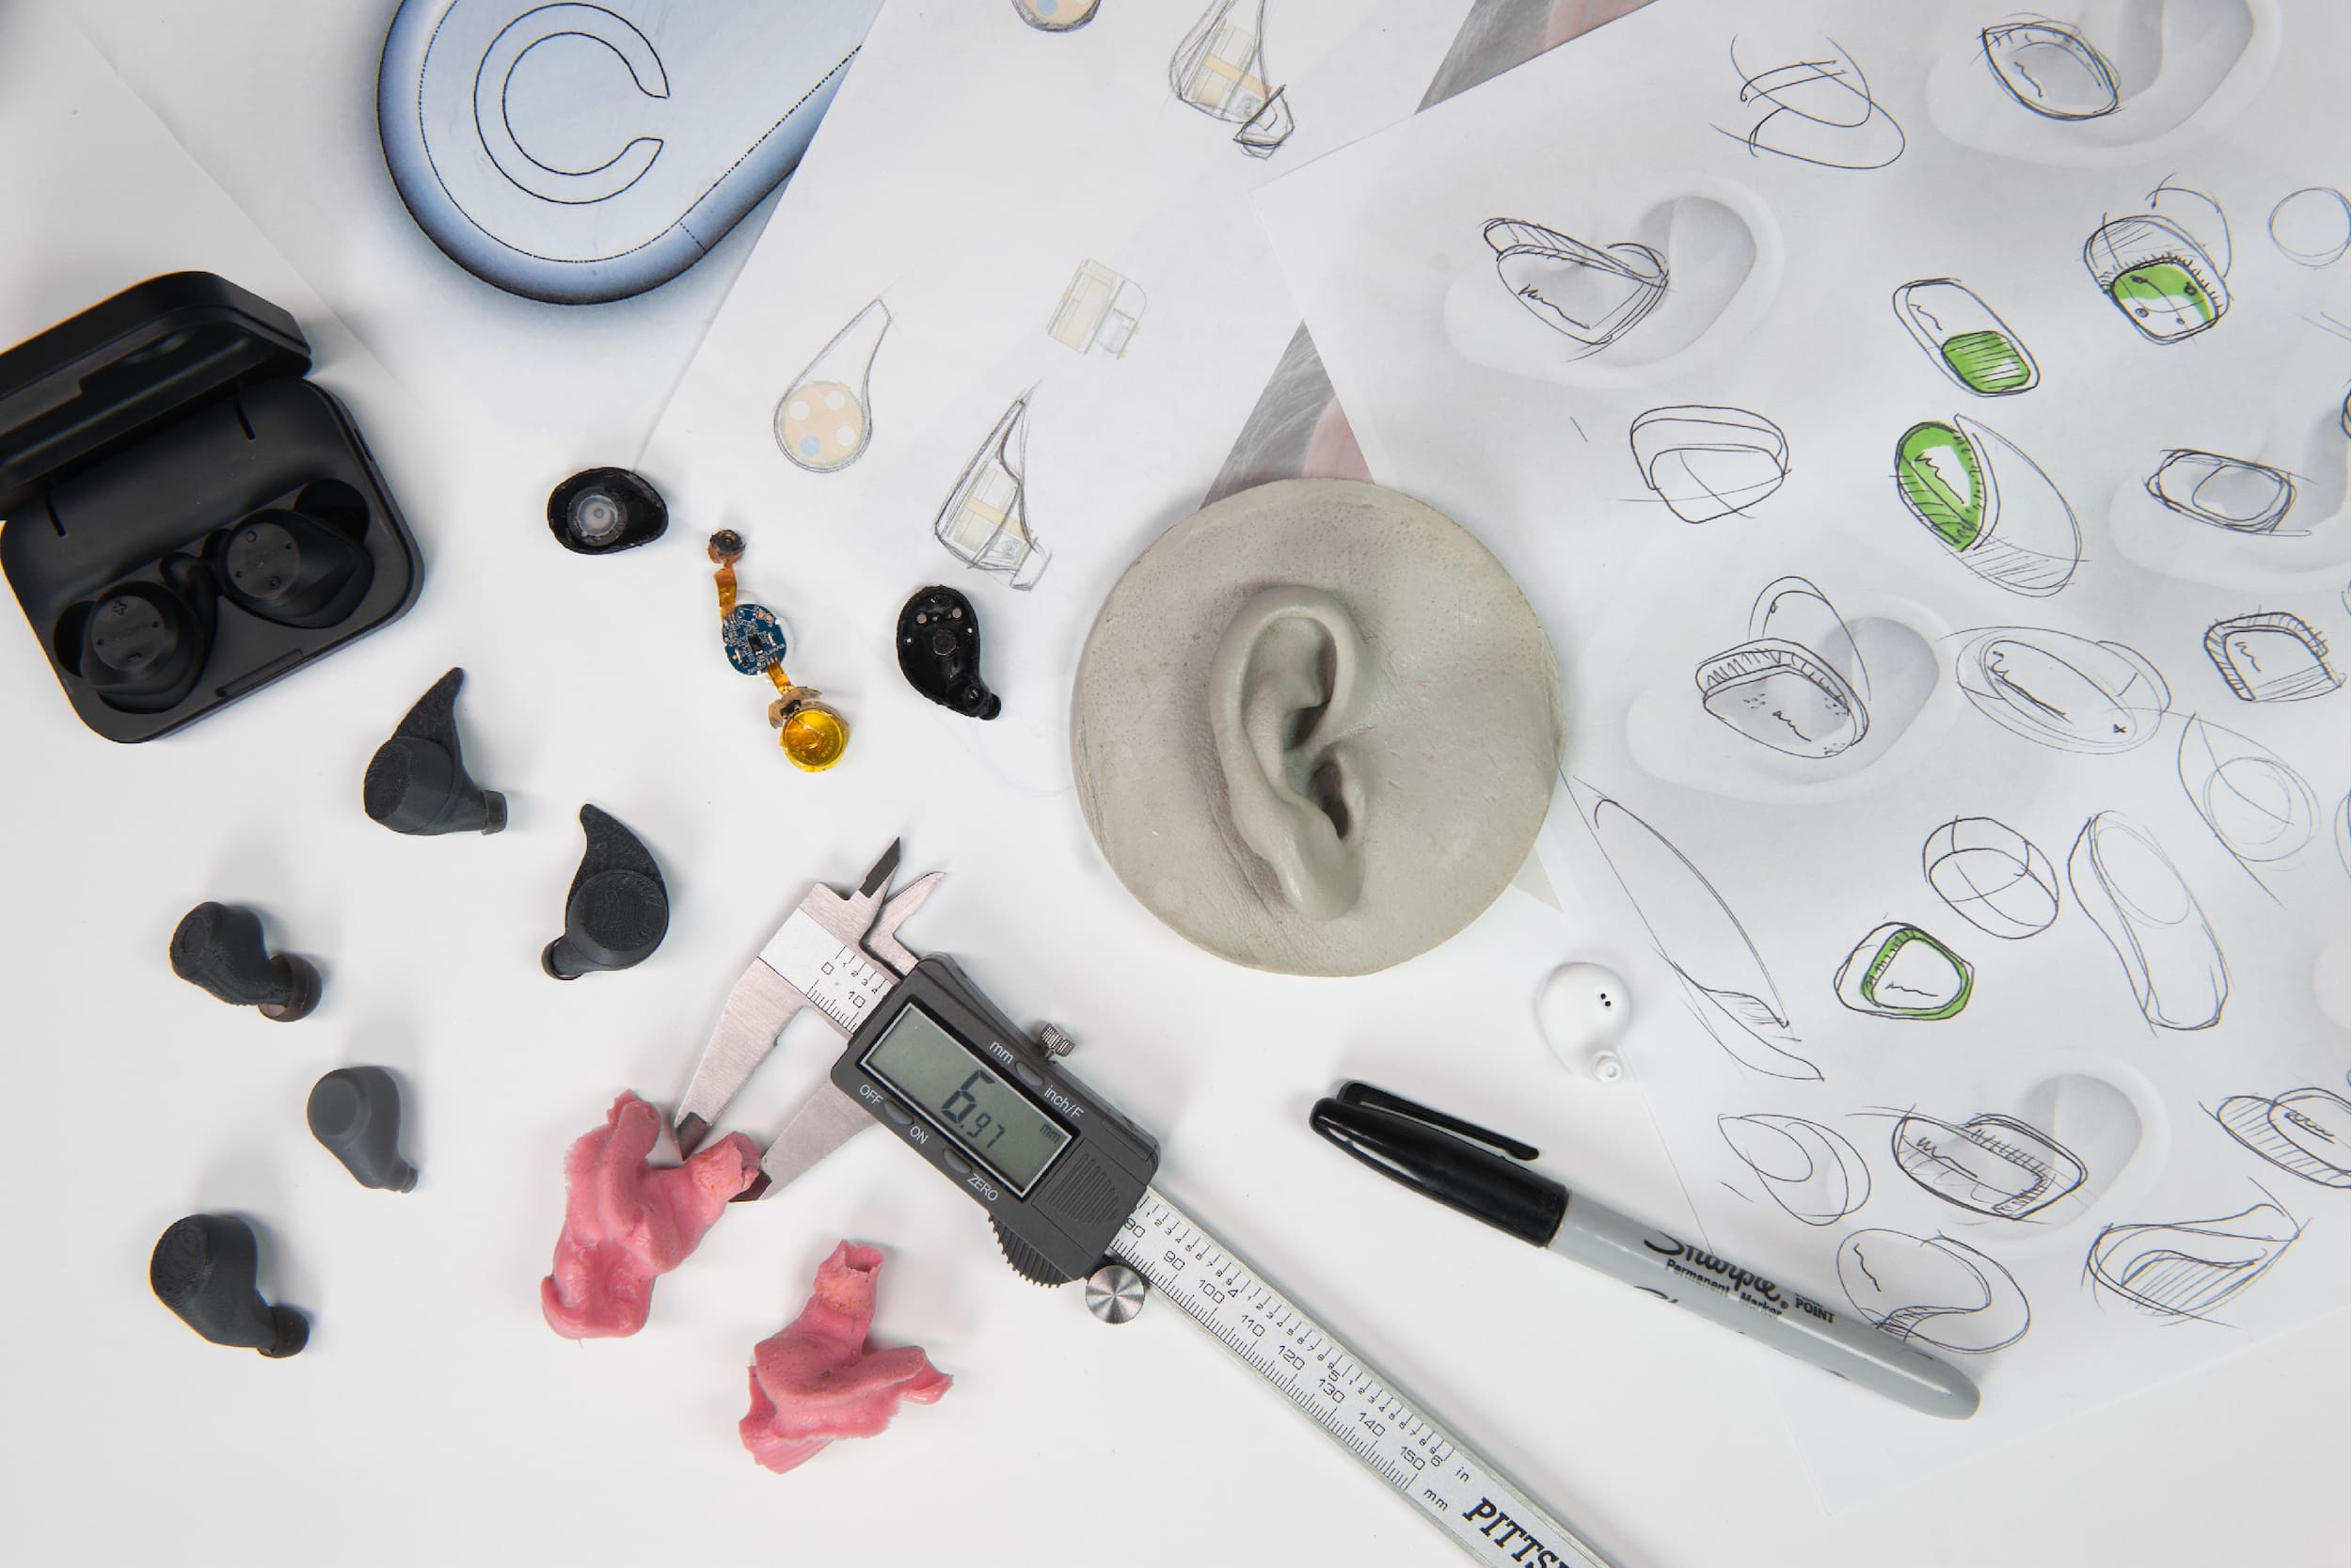 View of RKS Consumer Product Design Conceptualizing Cue Ear Buds with sketches and prototypes